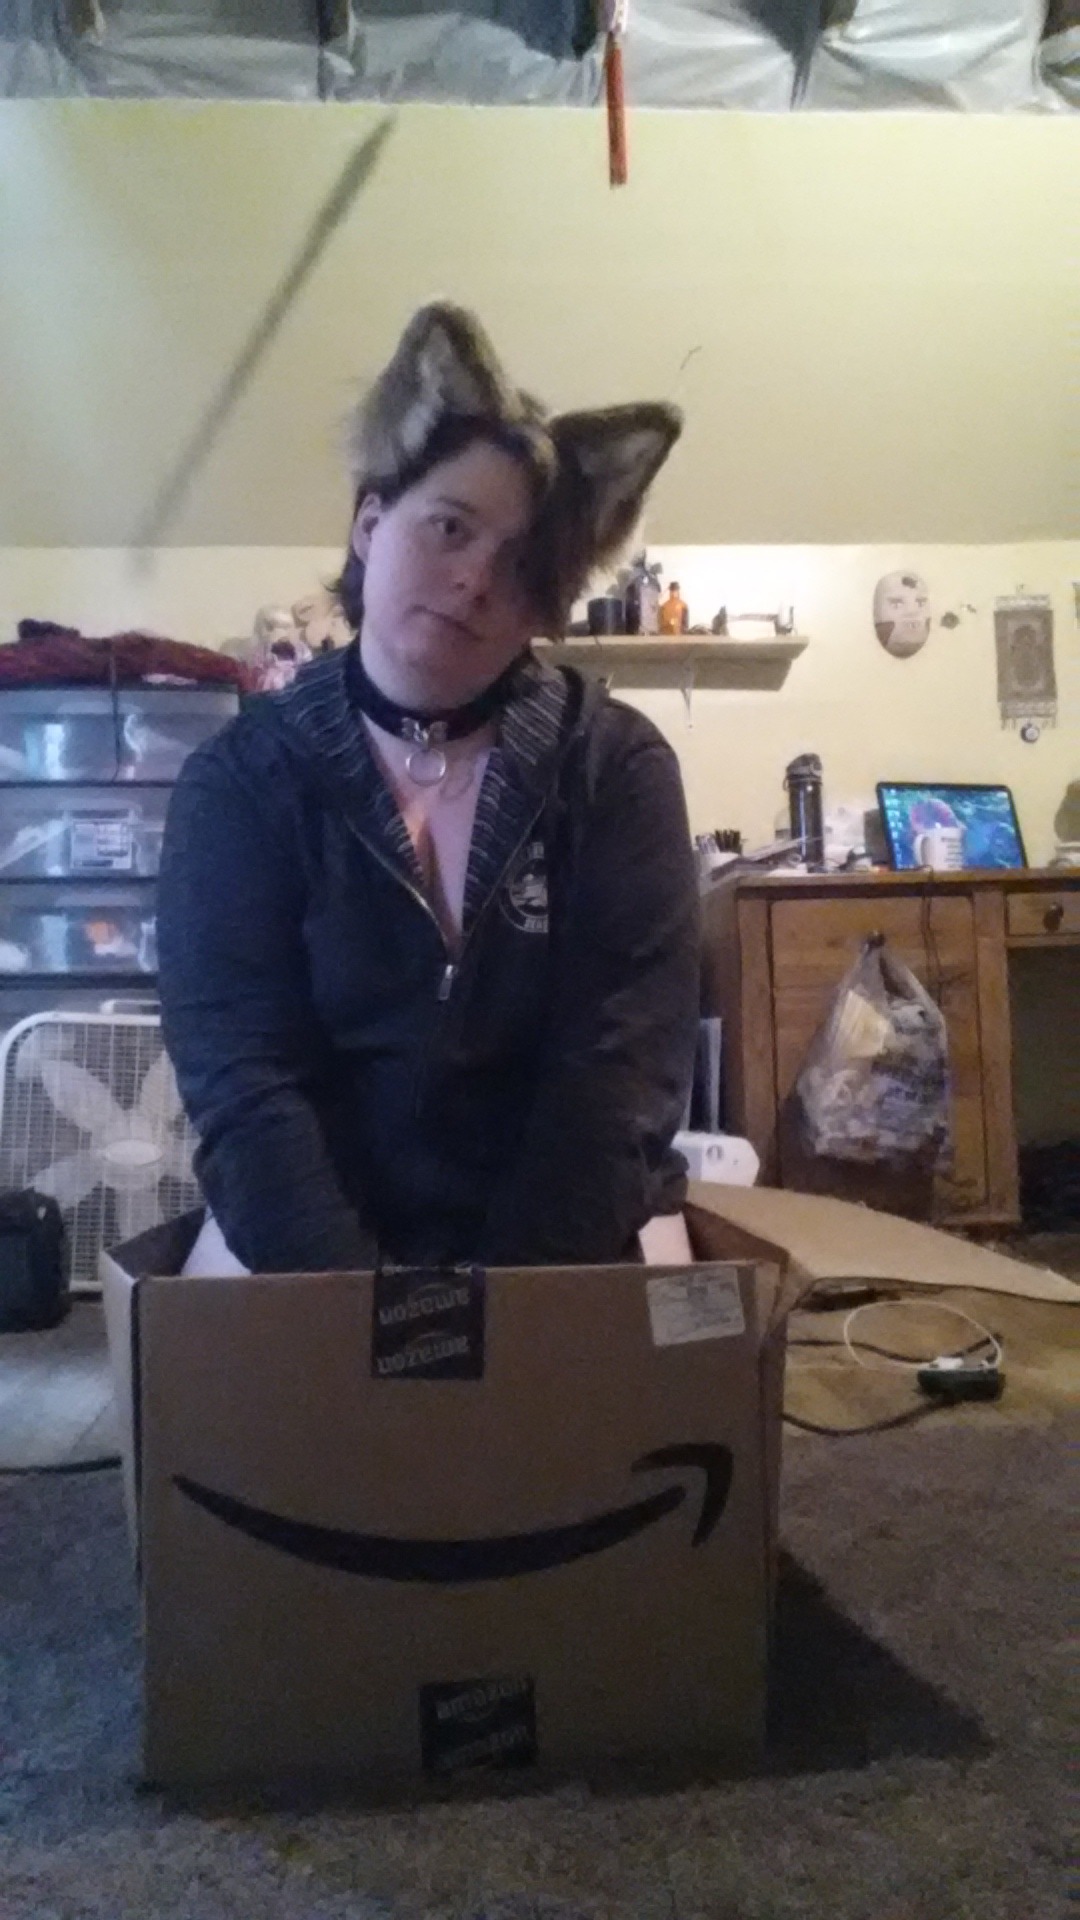 cura-wolf:I has a box! *wags and sits* it’s a large comfy box! Wolfy likes boxes